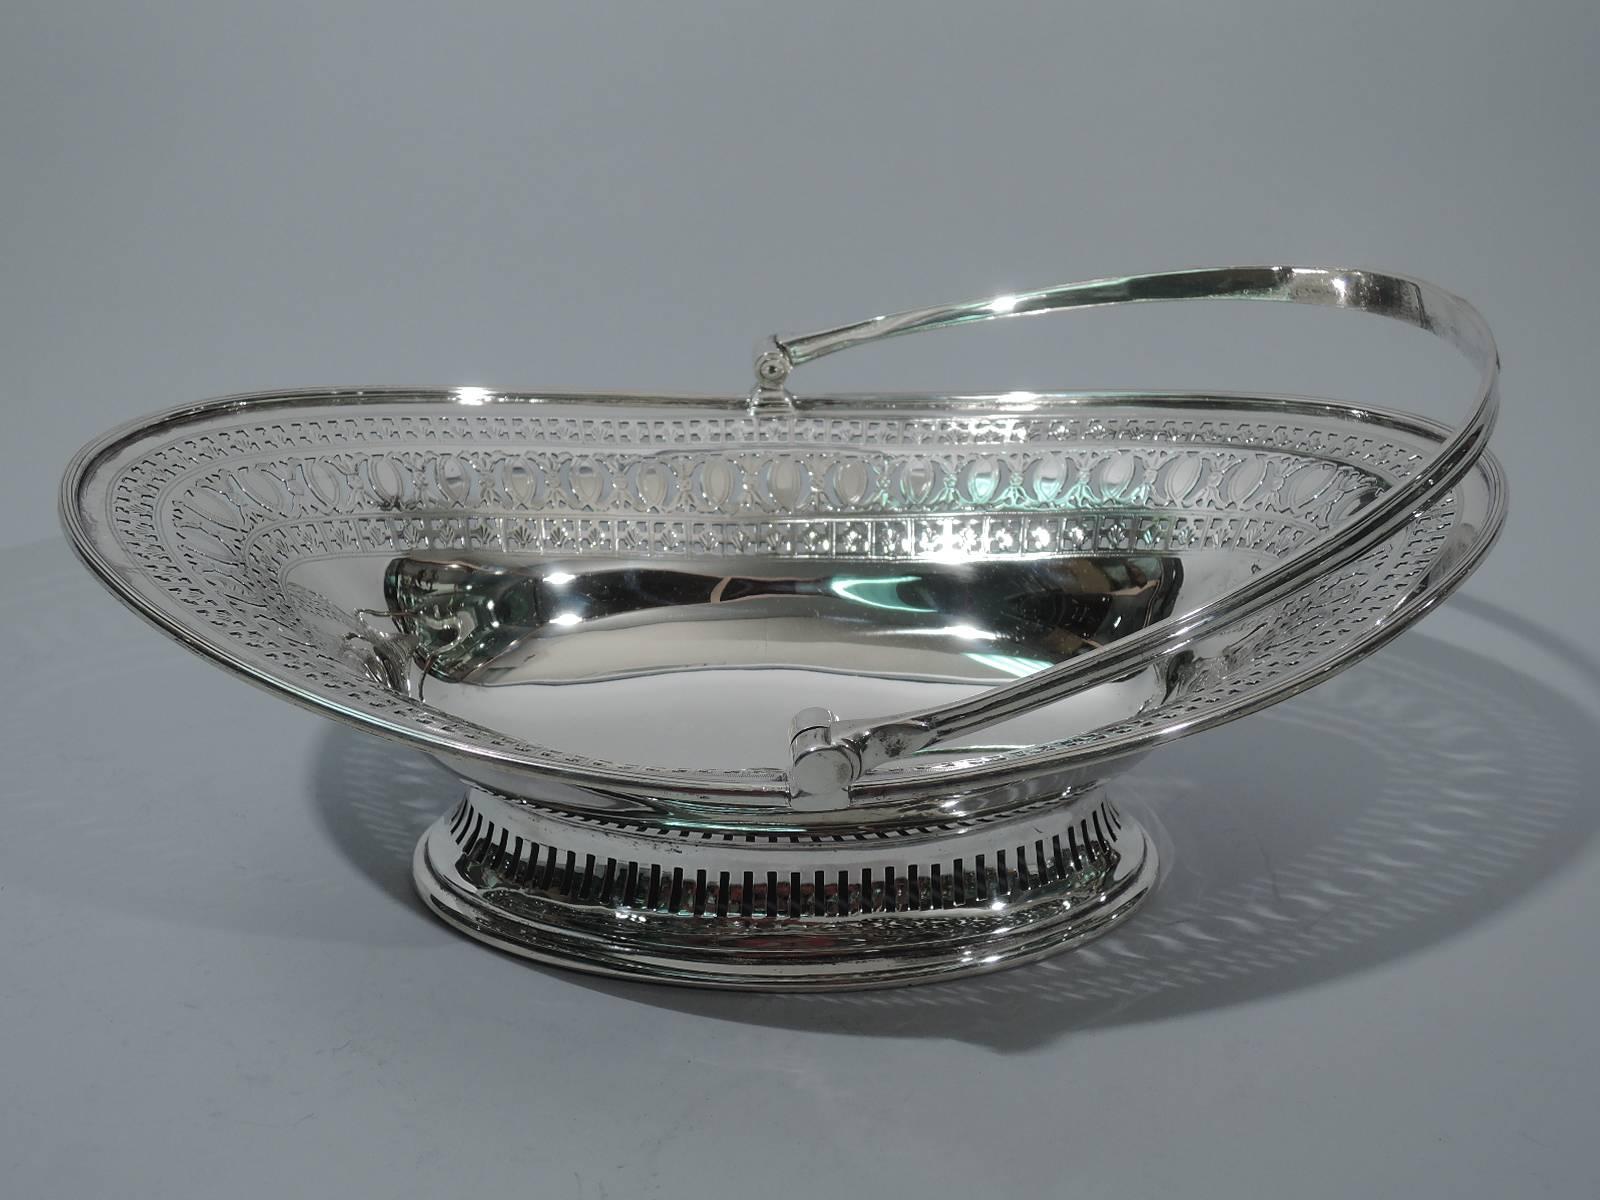 Neoclassical Revival Antique English Edwardian Neoclassical Sterling Silver Basket